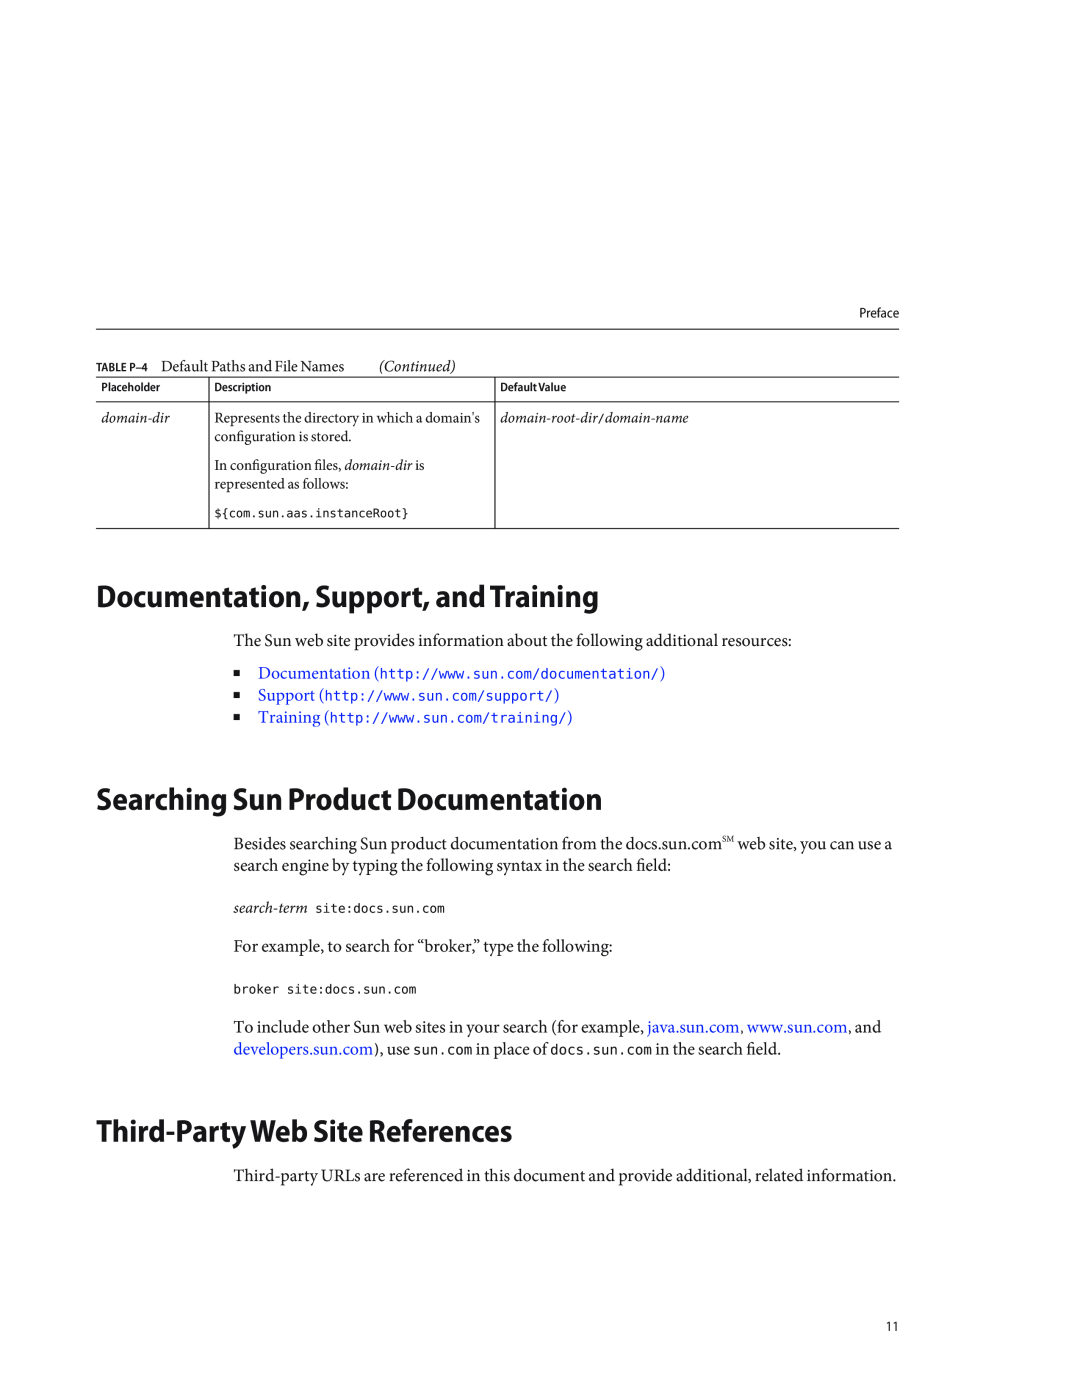 Sun Microsystems 820682310 manual Documentation, Support, and Training, Searching Sun Product Documentation 